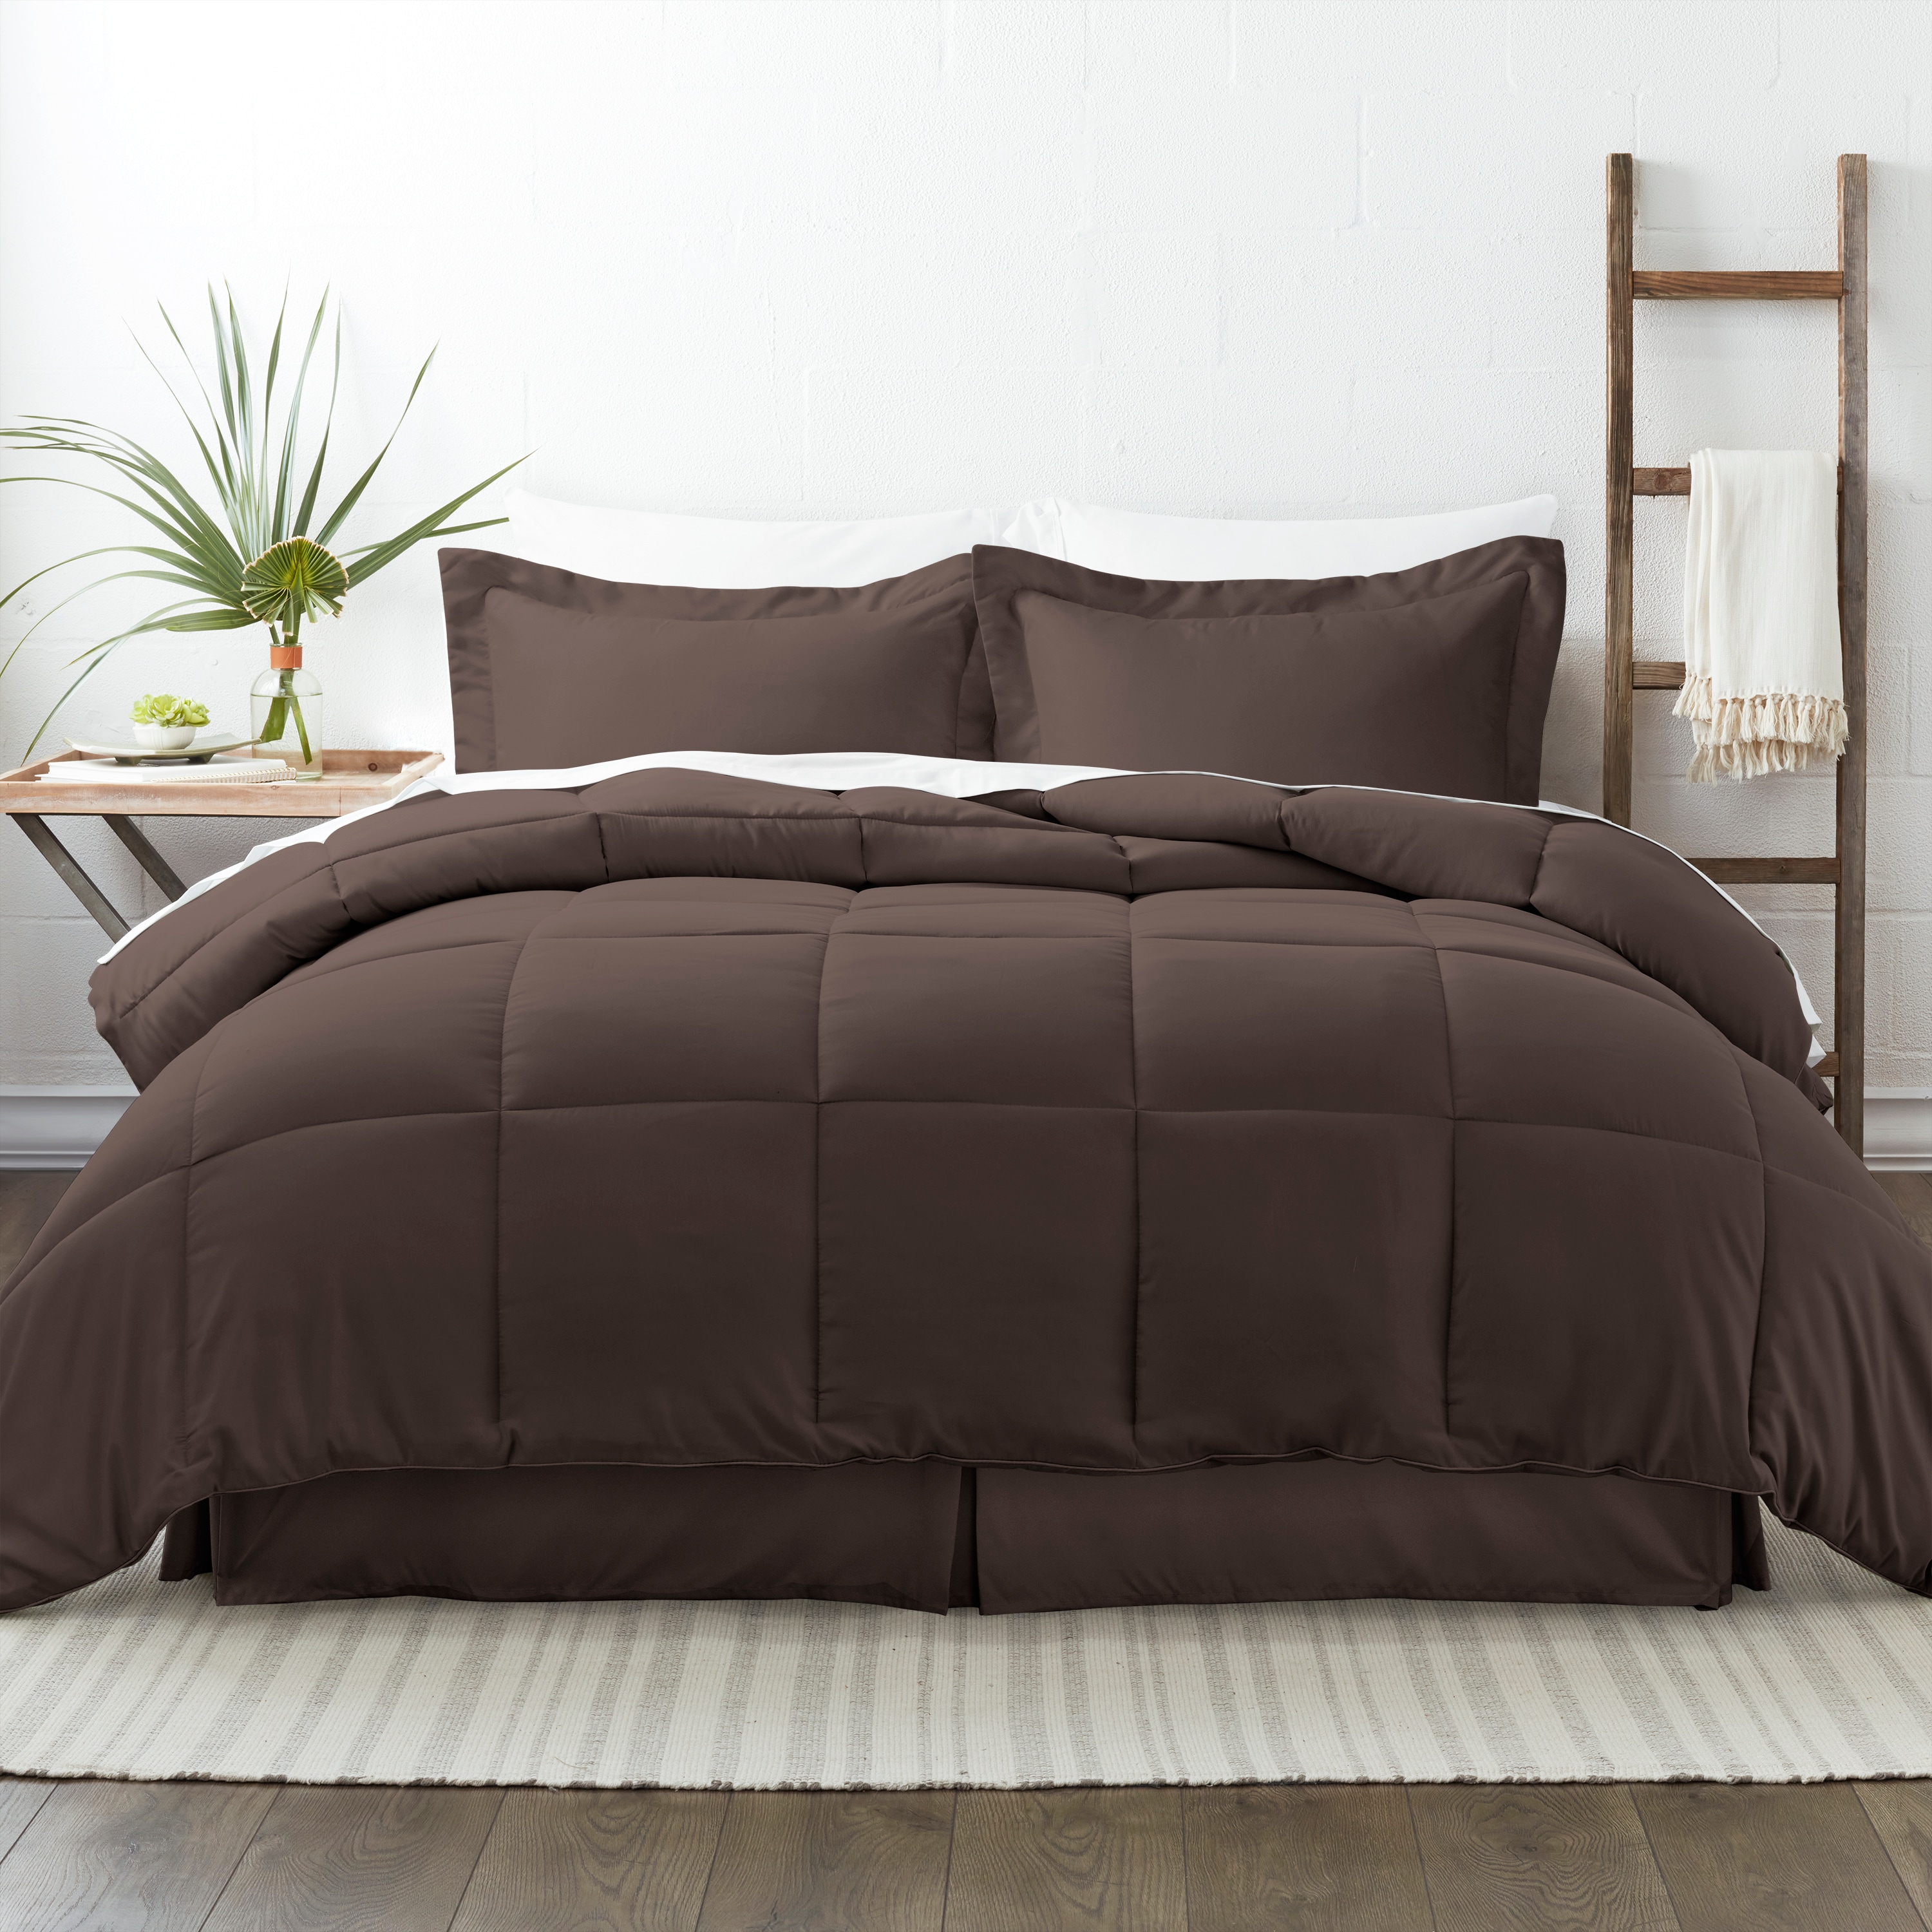 Duvet Cover Set Soft Brushed Comforter Cover W/Pillow Sham Chocolate King 